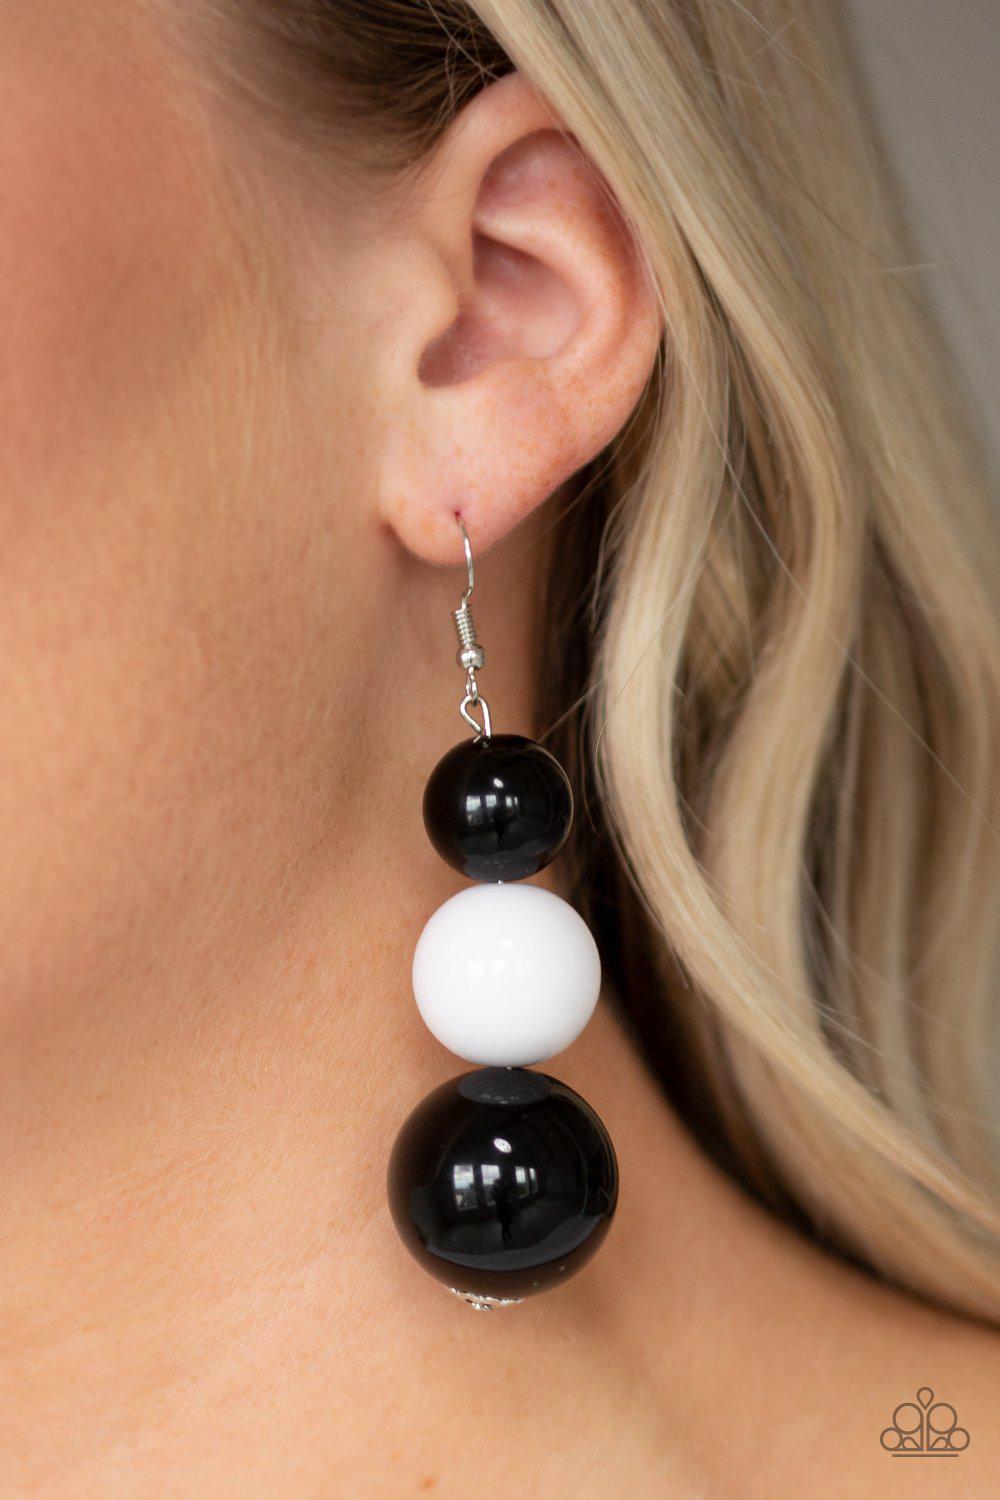 Material World Multi - Black and White Earrings - Paparazzi Accessories - model -CarasShop.com - $5 Jewelry by Cara Jewels